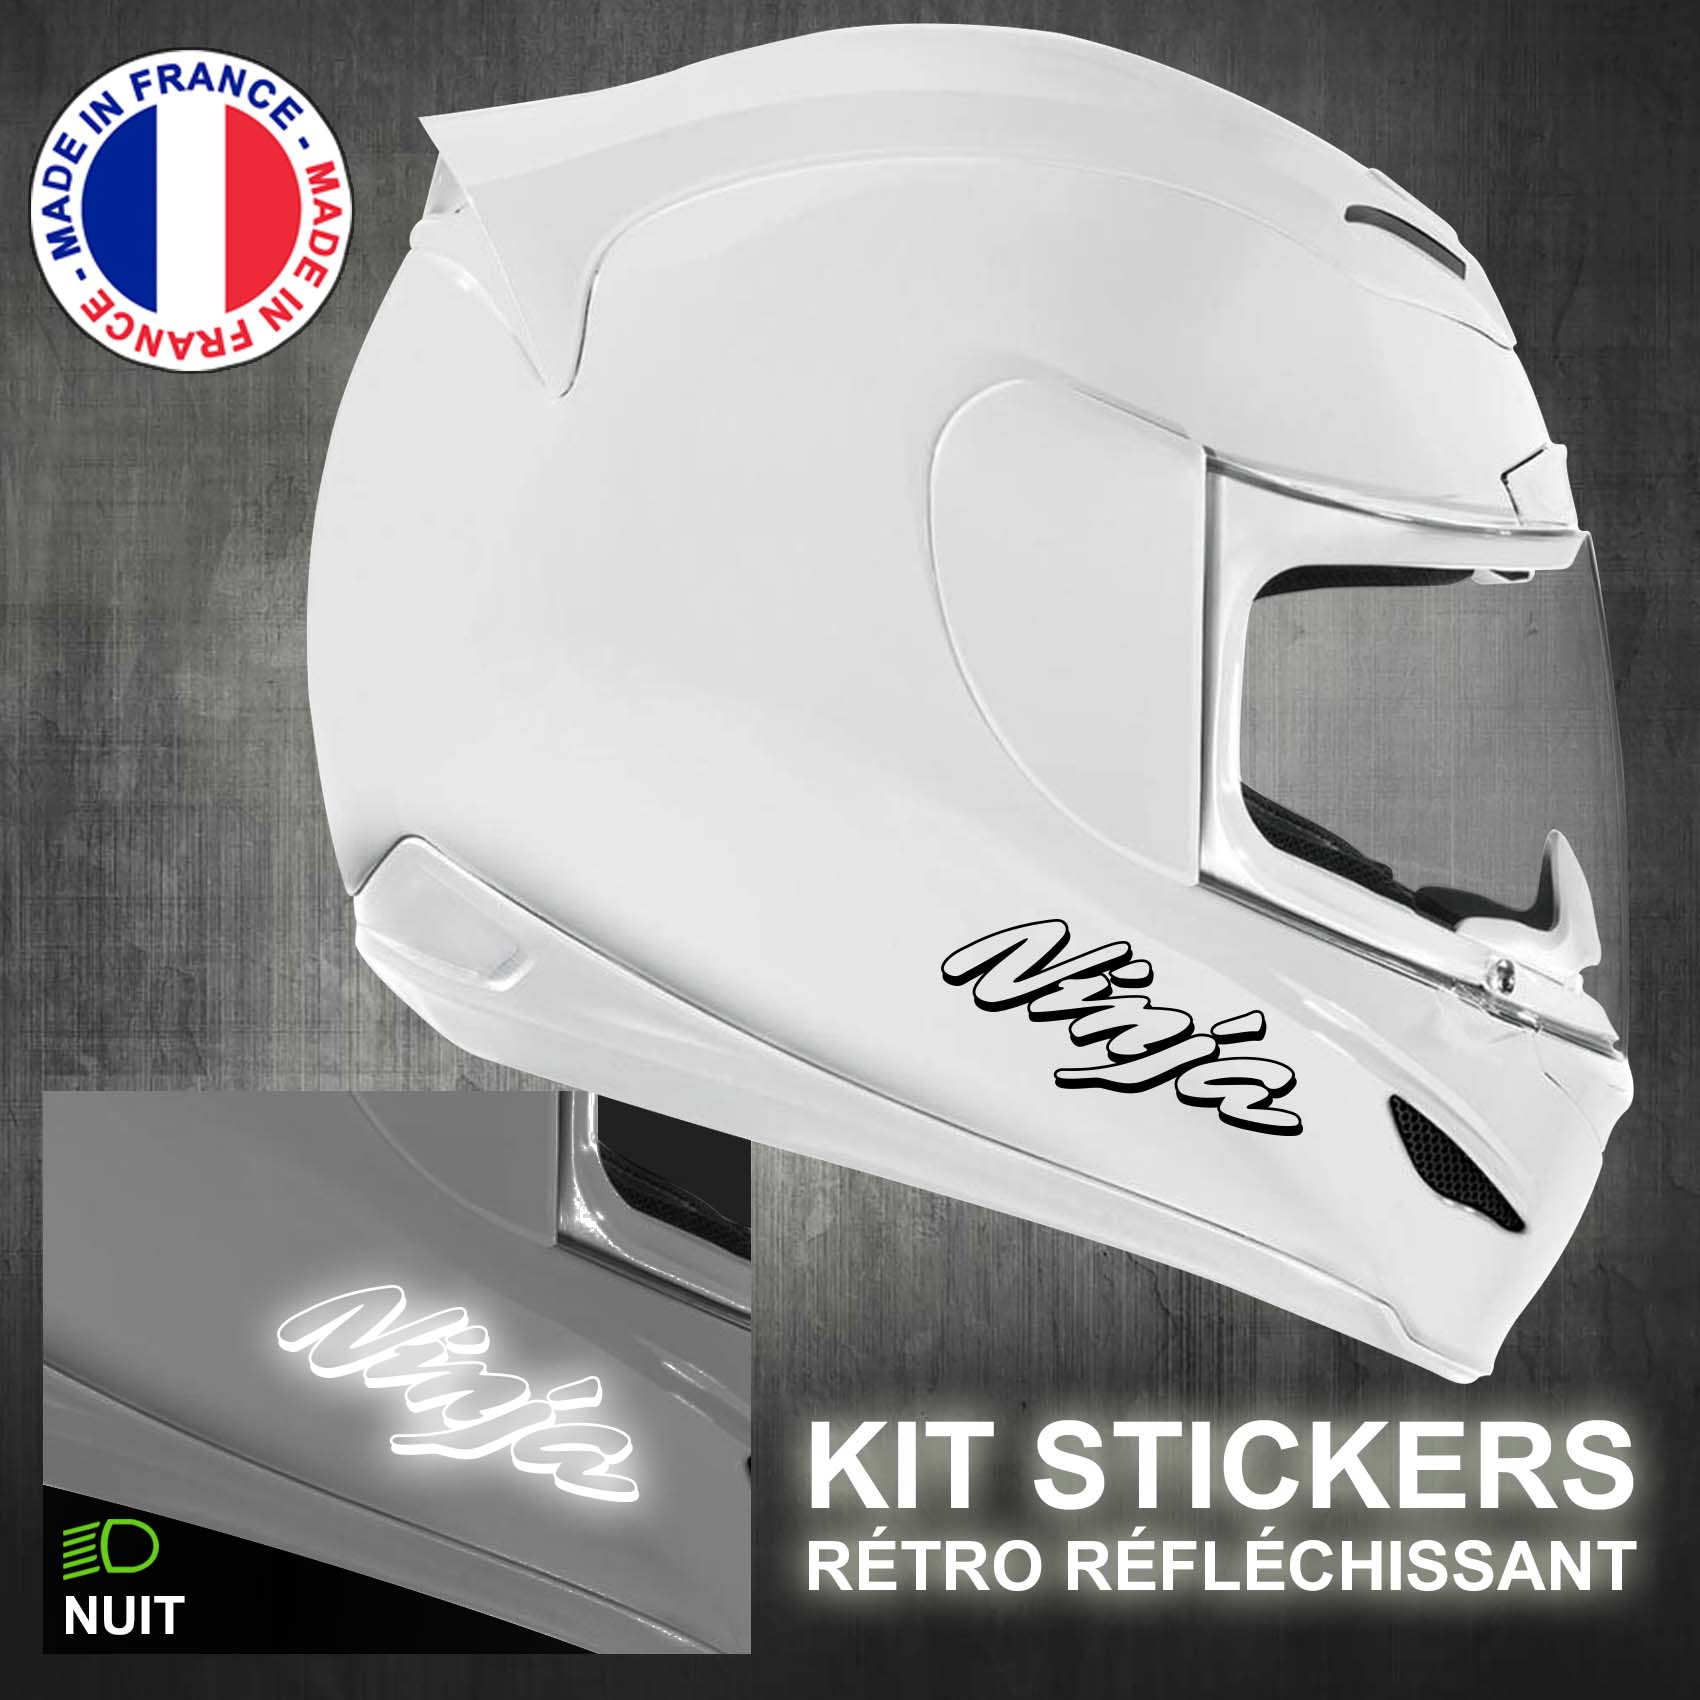 stickers-casque-moto-ninja-kawasaki-ref2-retro-reflechissant-autocollant-moto-velo-tuning-racing-route-sticker-casques-adhesif-scooter-nuit-securite-decals-personnalise-personnalisable-min